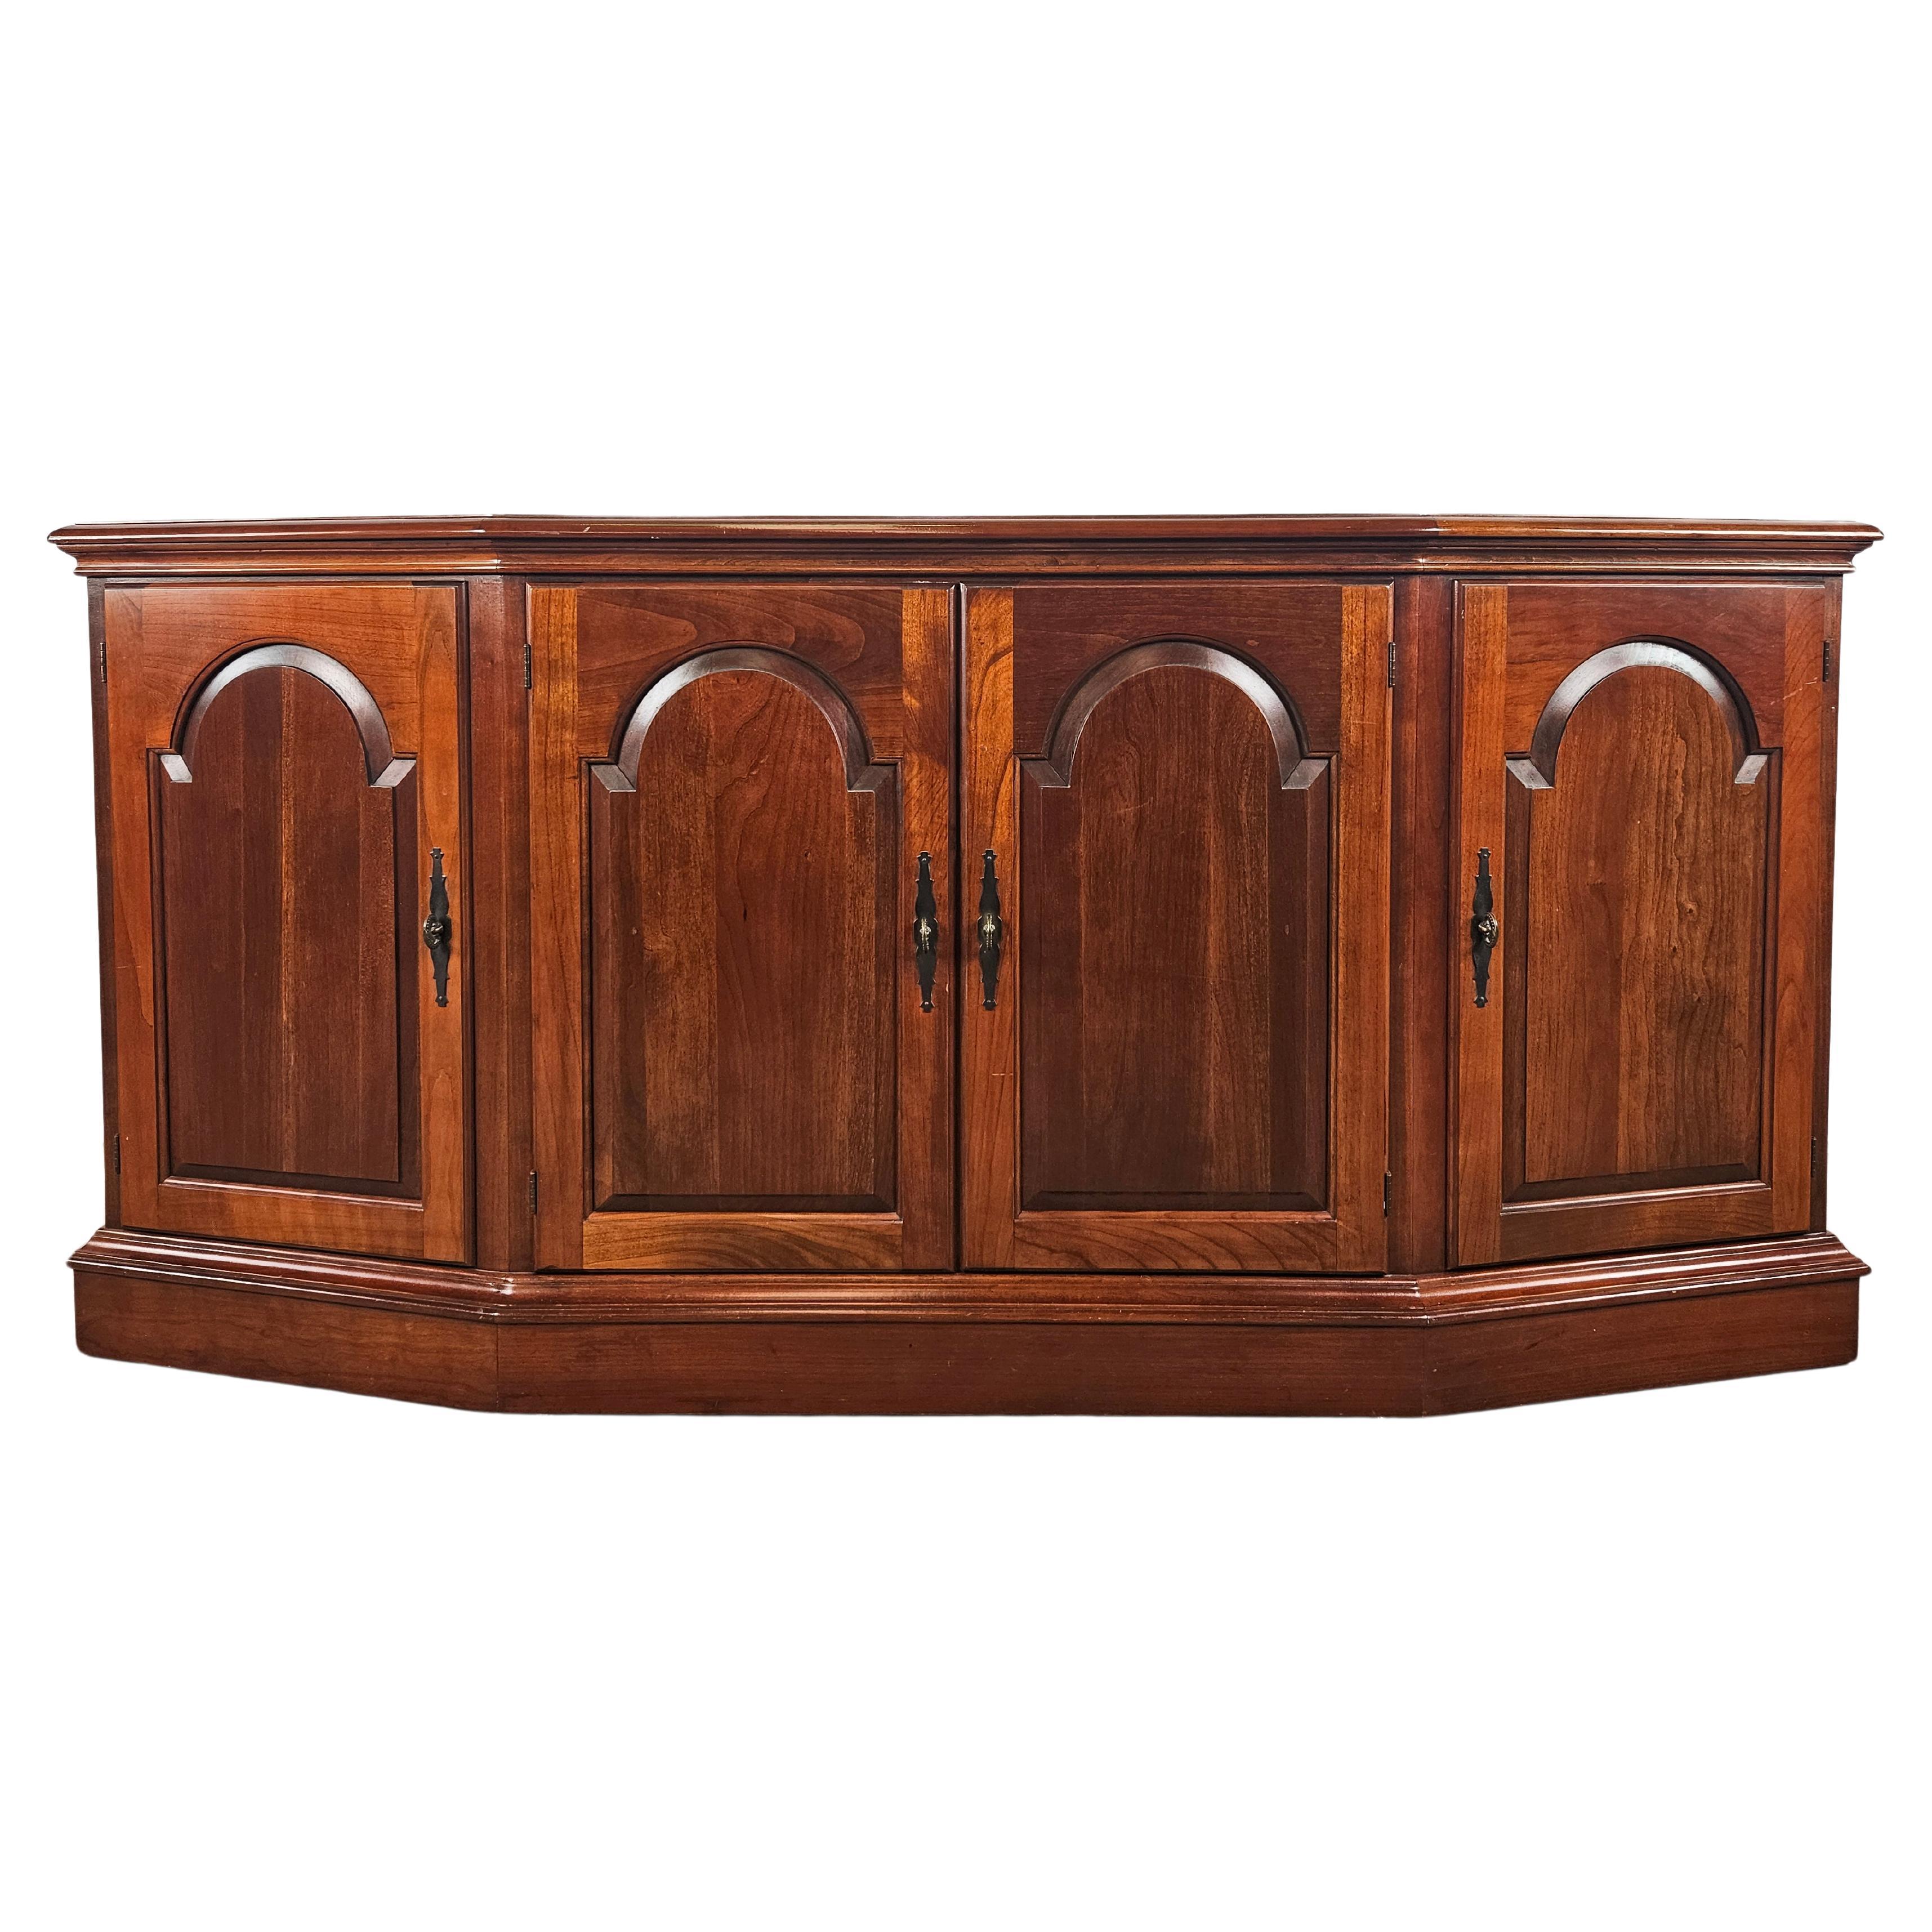 Cherry wood living room or hall sideboard by Fantoni